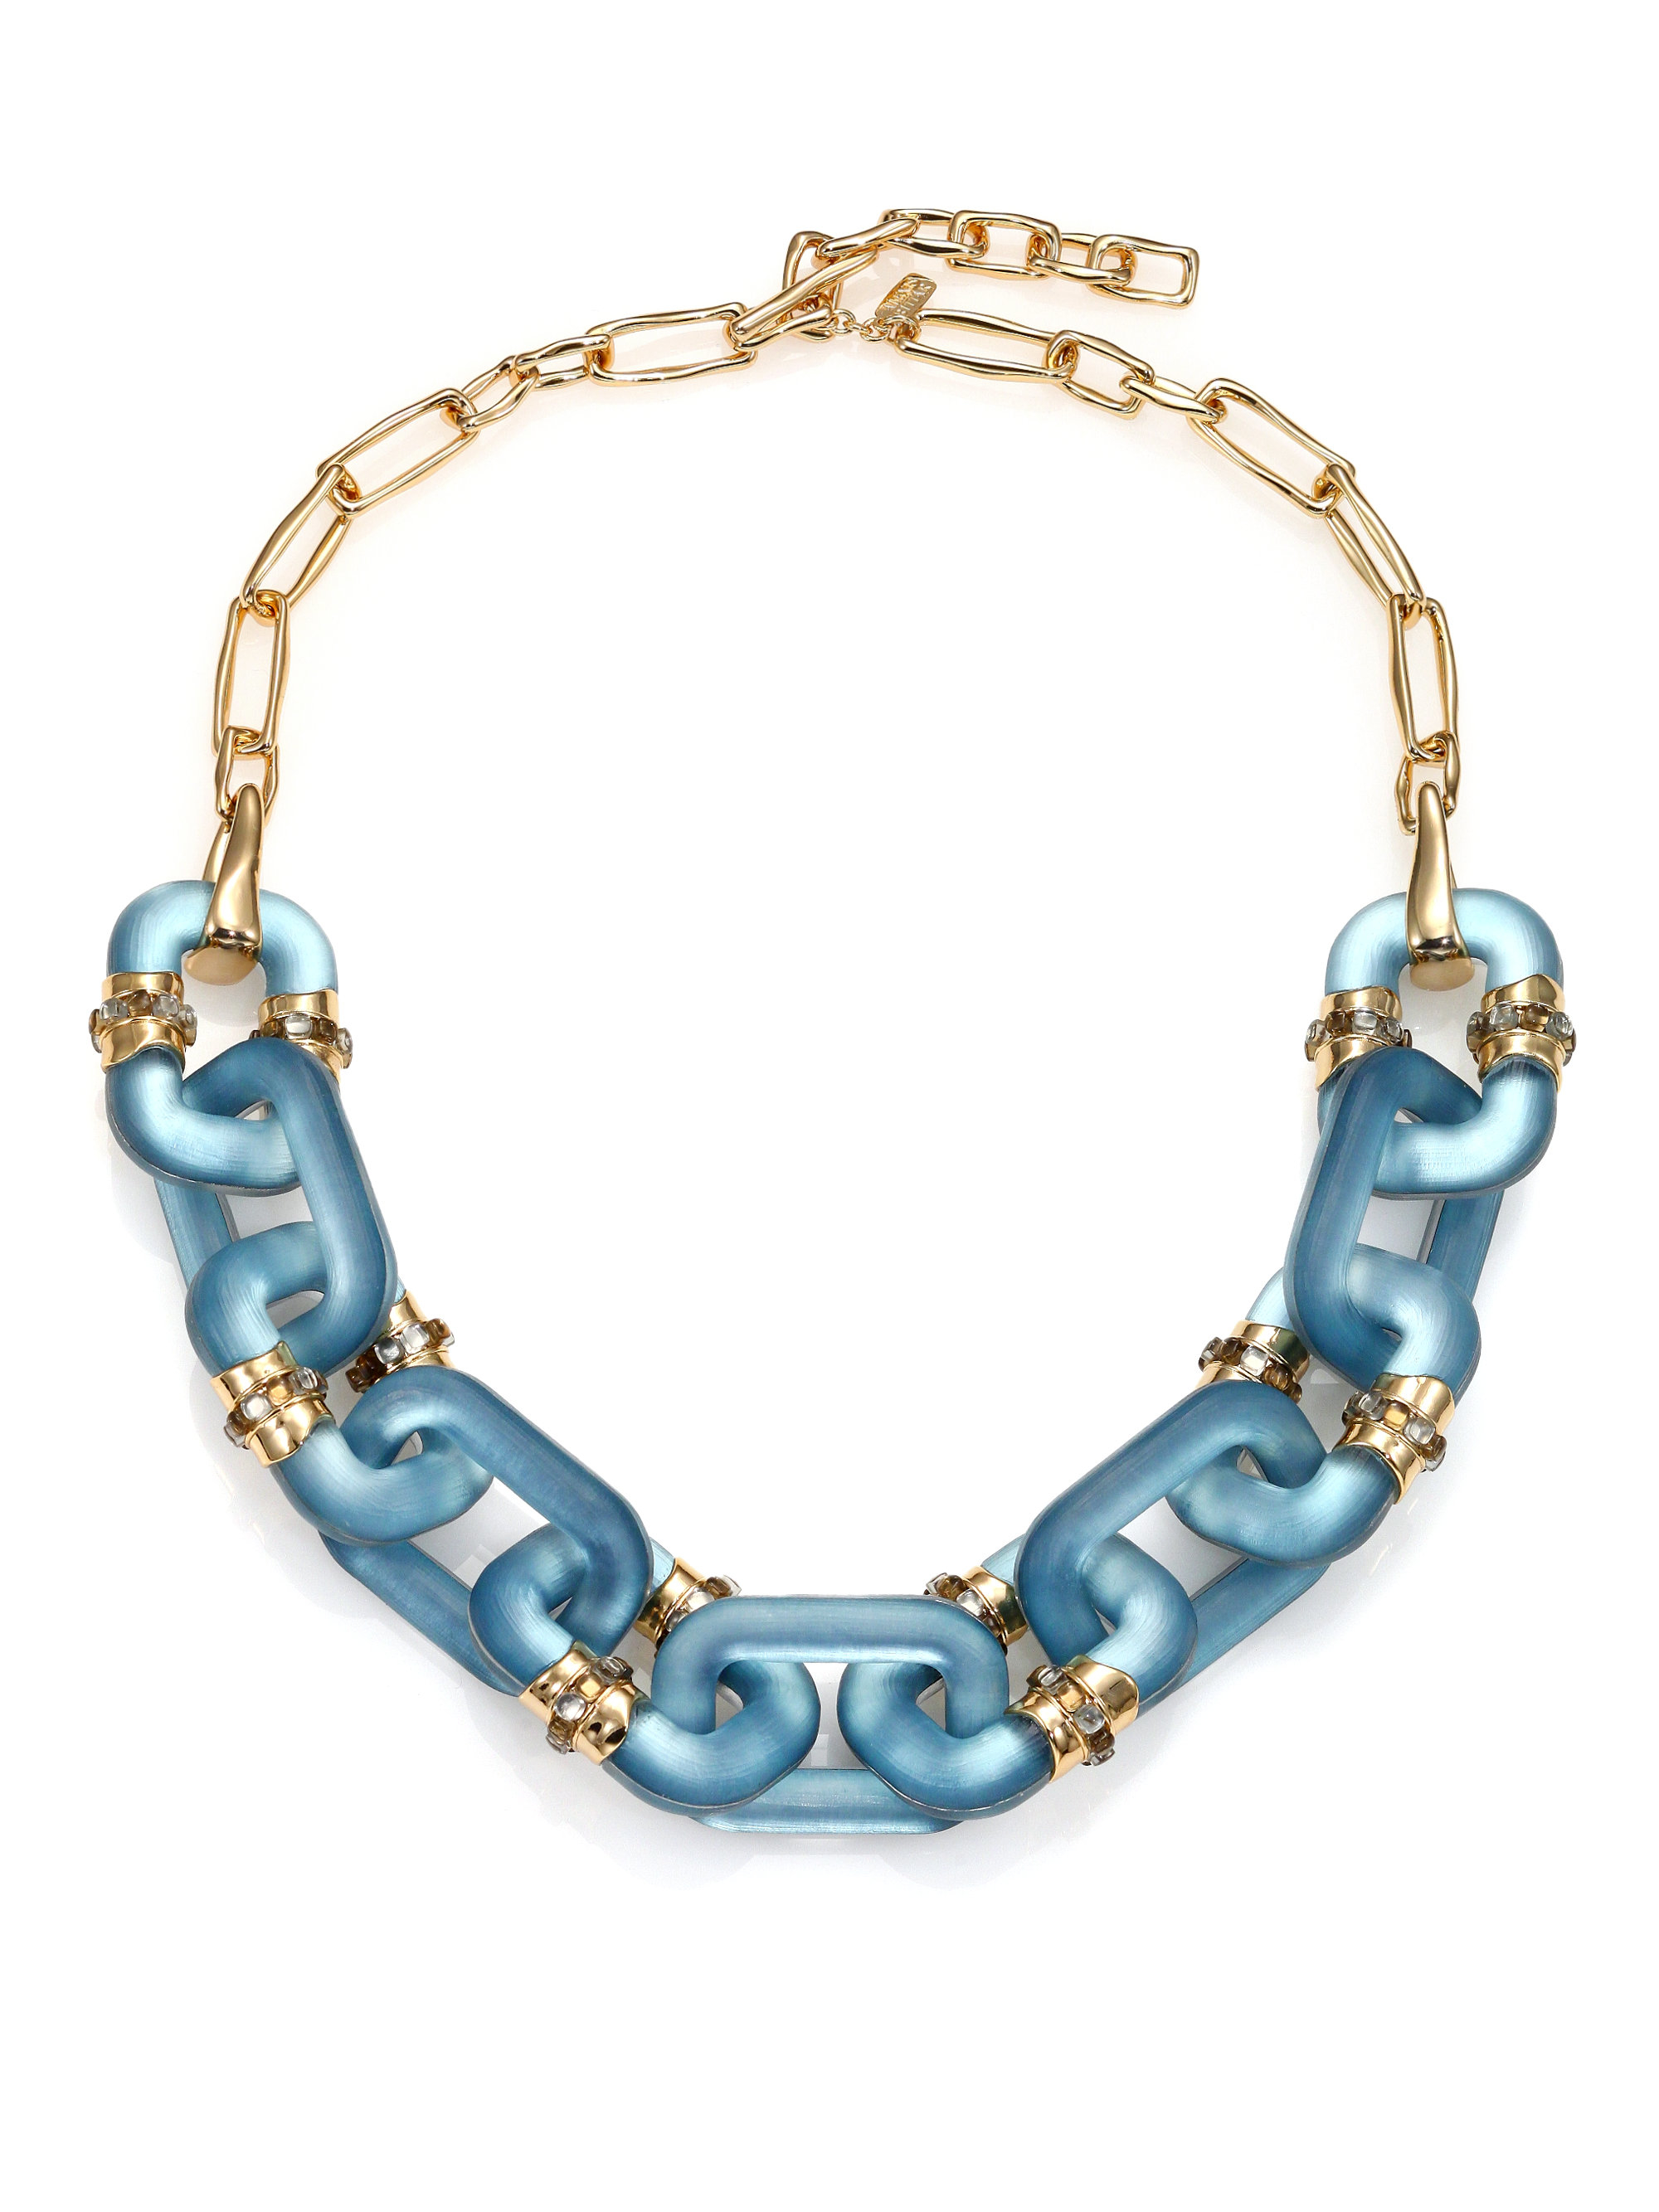 Alexis bittar Sport Deco Lucite Link Necklace in Blue | Lyst